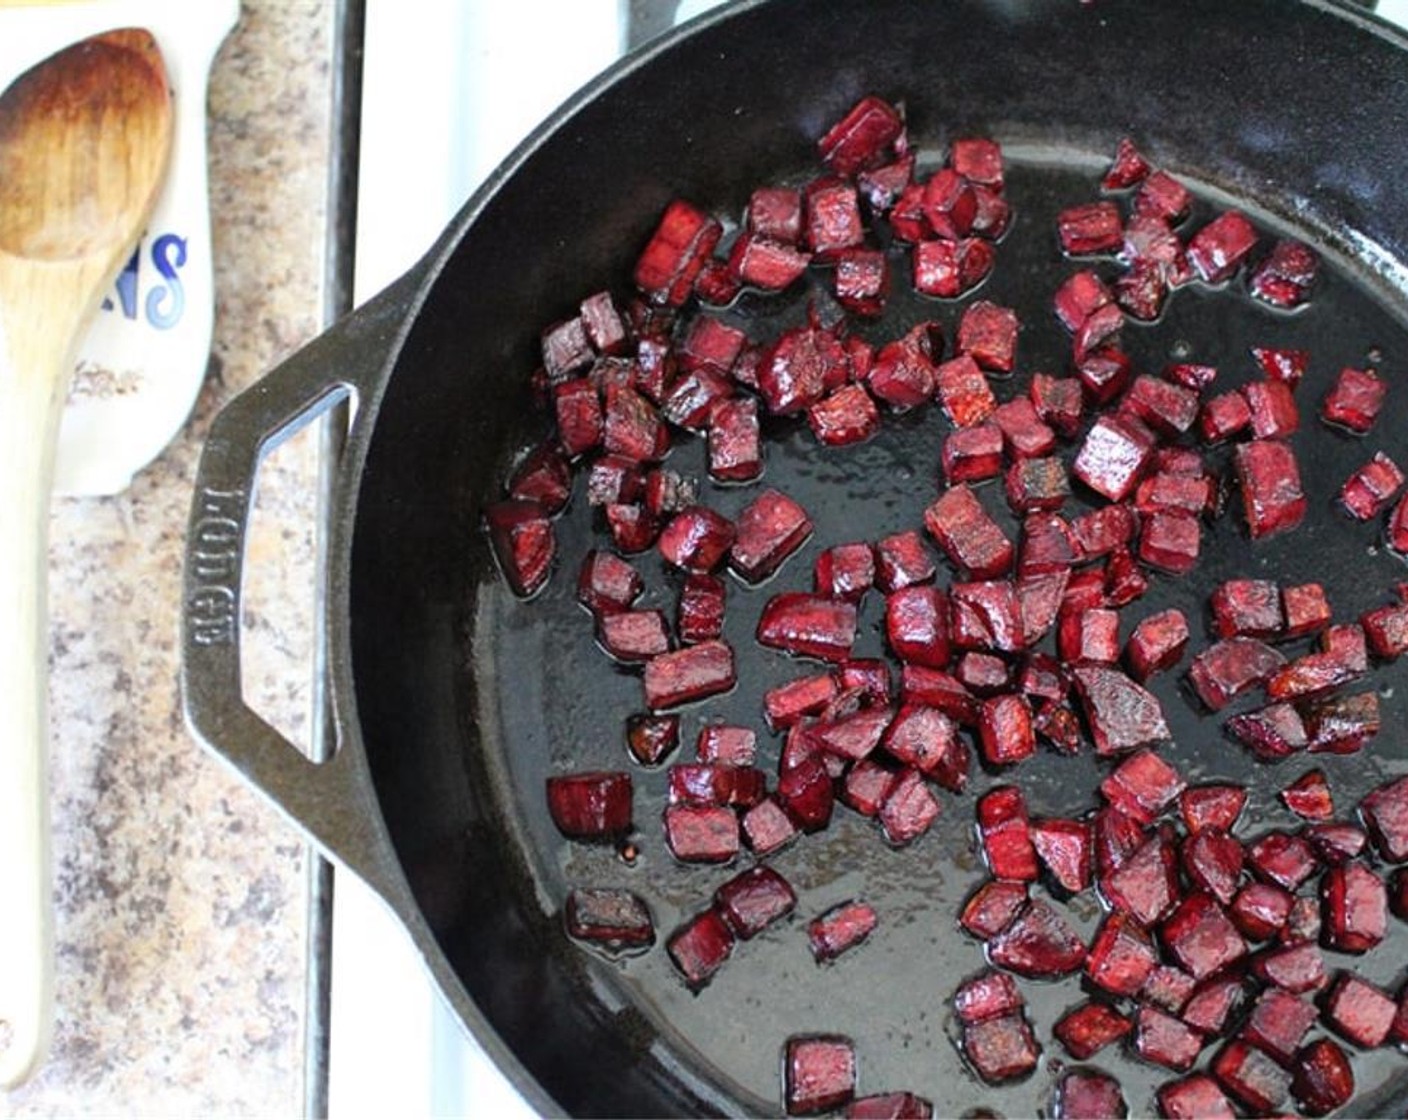 step 1 Heat the skillet, add Olive Oil (1 Tbsp) and add the Beets (2), Salt (to taste), and Ground Black Pepper (to taste). Cook over medium-low heat for about 10 minutes, or until the beets are tender, stirring occasionally.